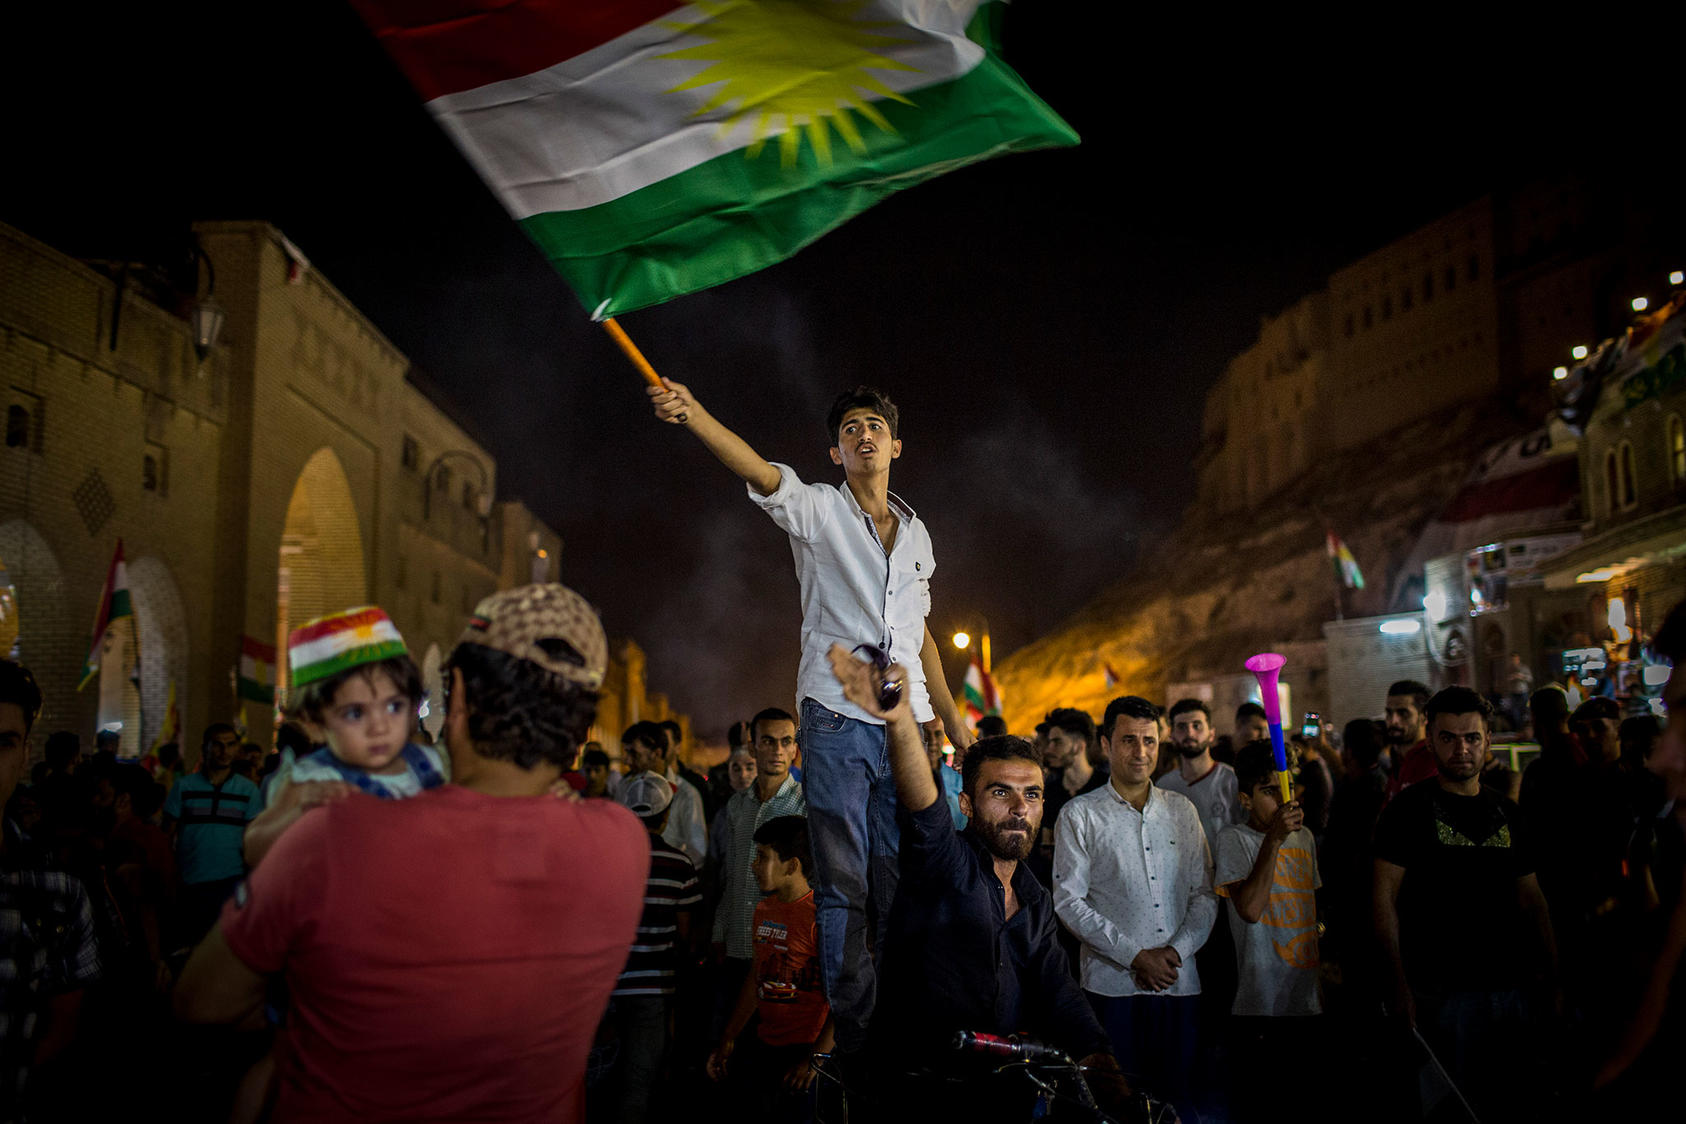 A man waves the Kurdish flag after the results of an independence referendum were announced in Irbil, Iraq, Sept. 27, 2017